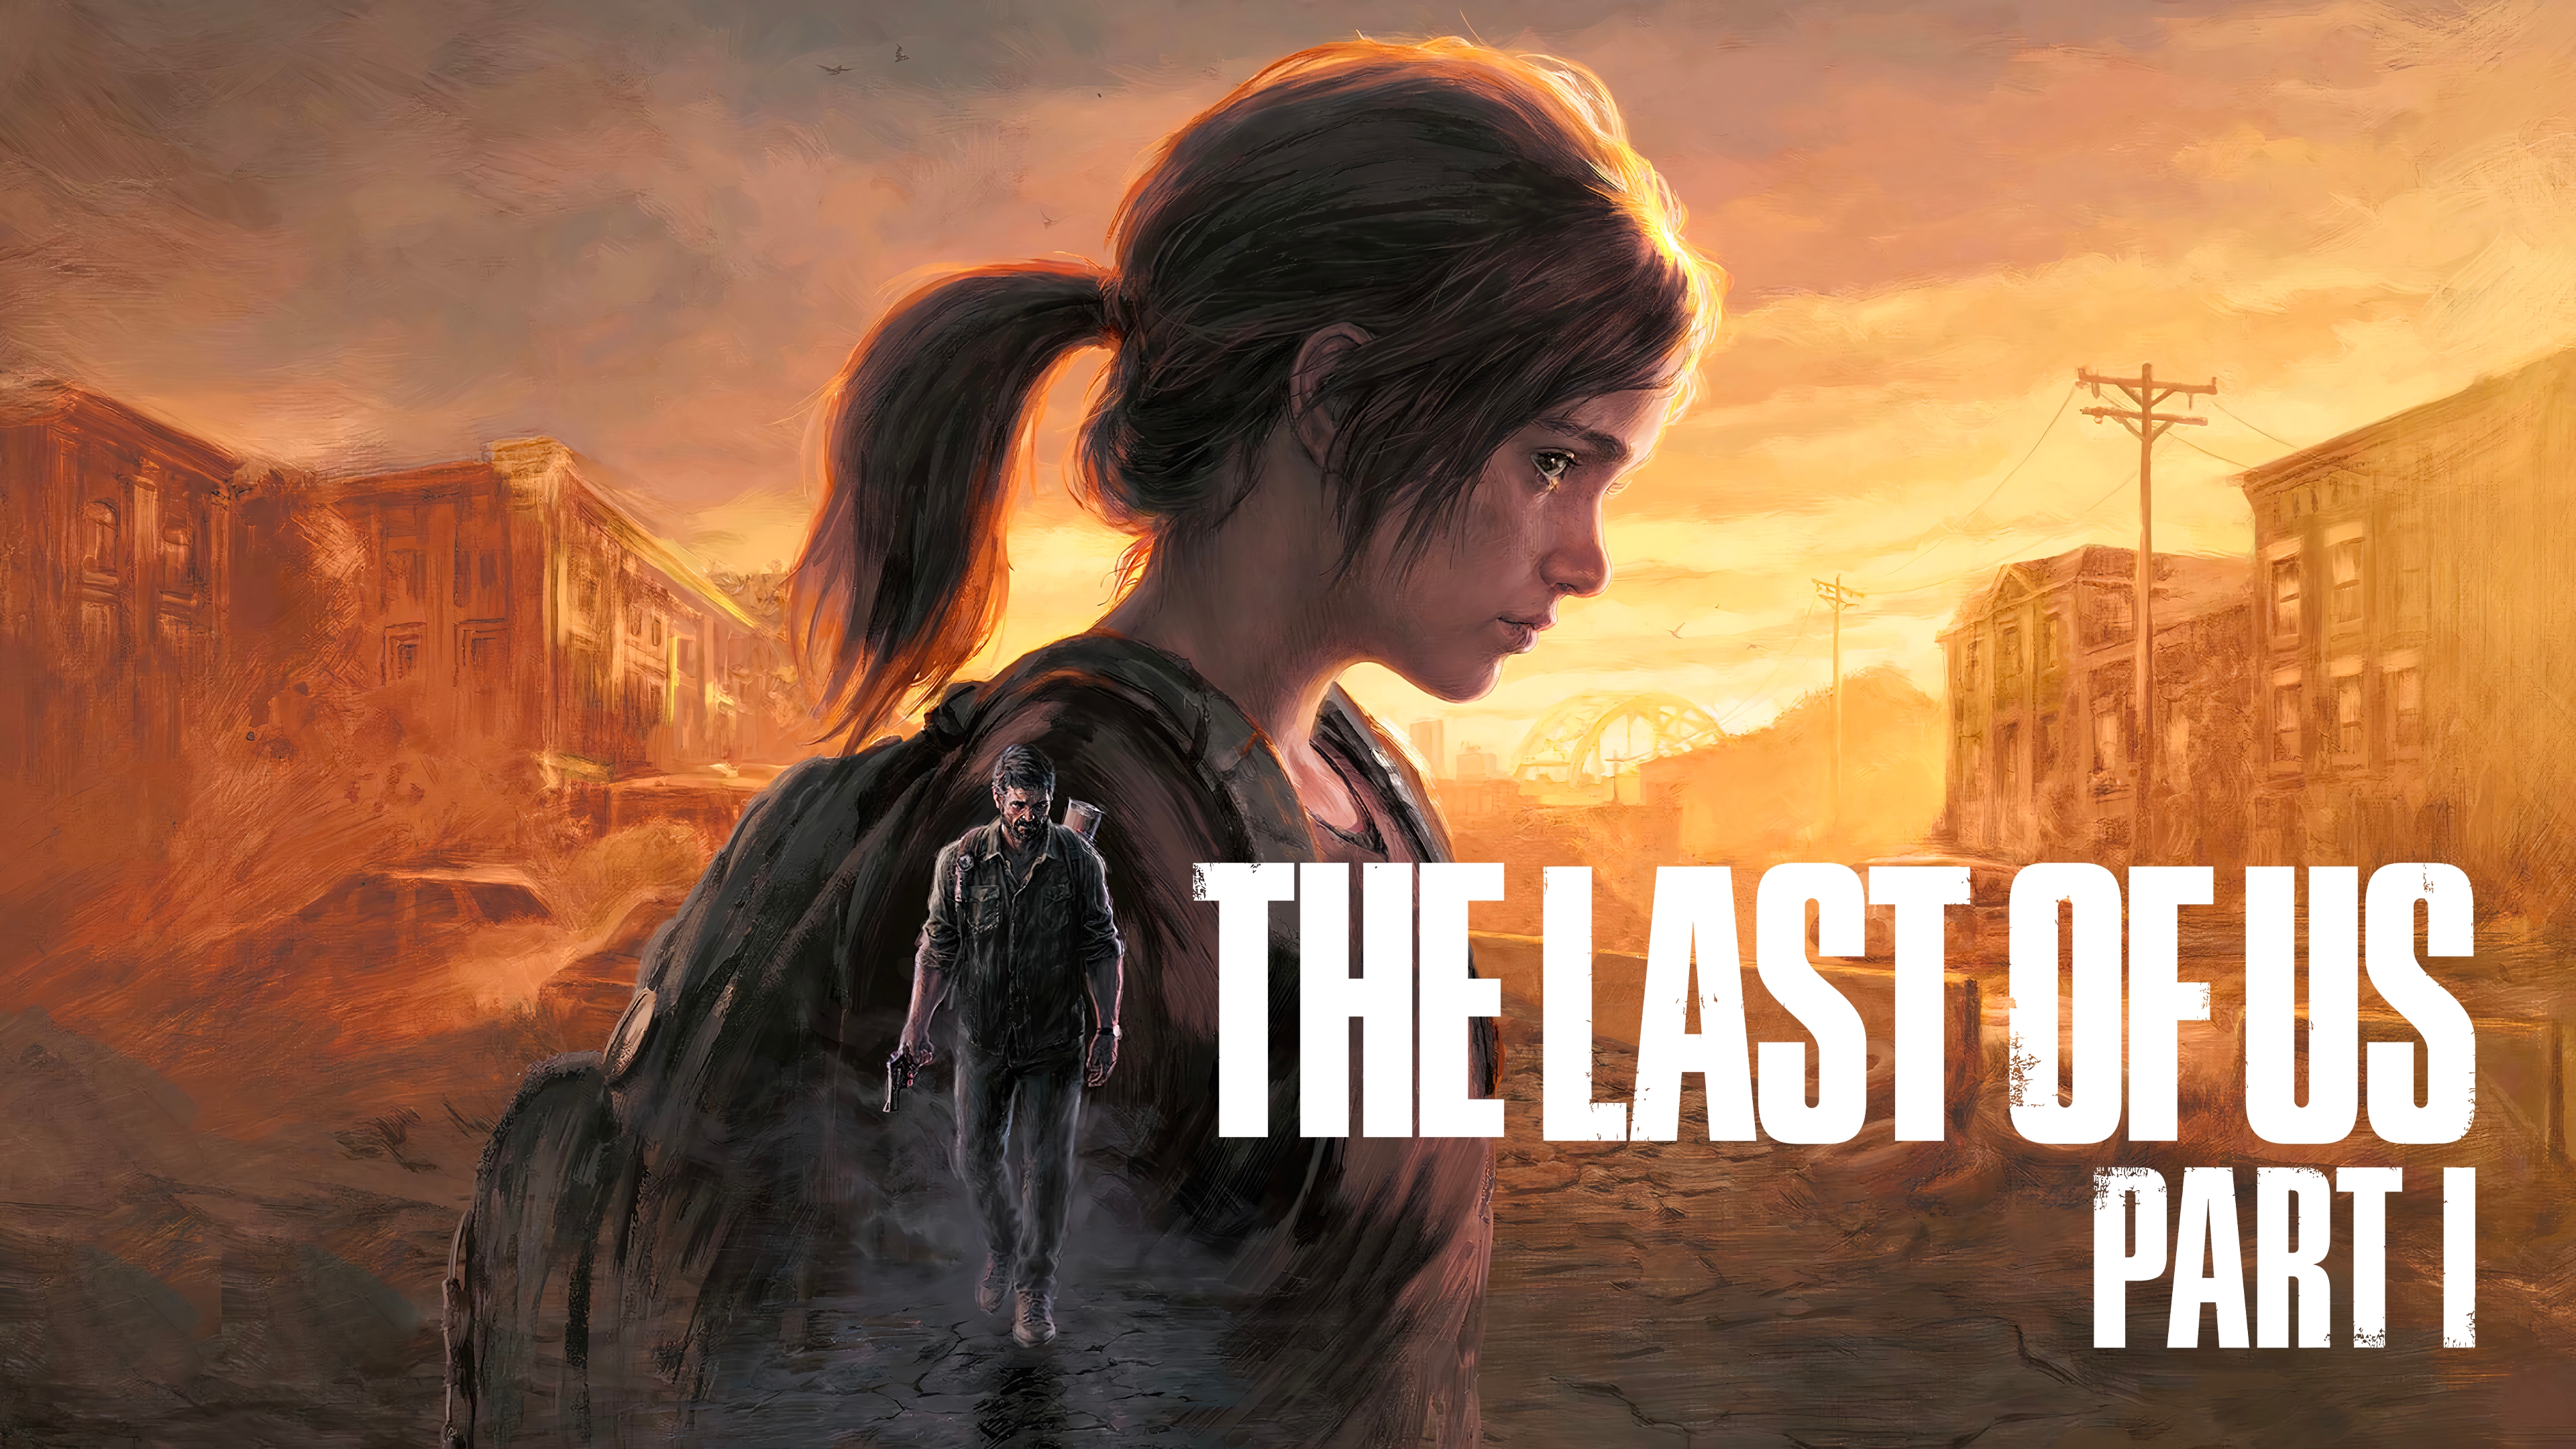 The Last of Us: Part 1 PC vs PS5 vs Steam Deck Performance Review